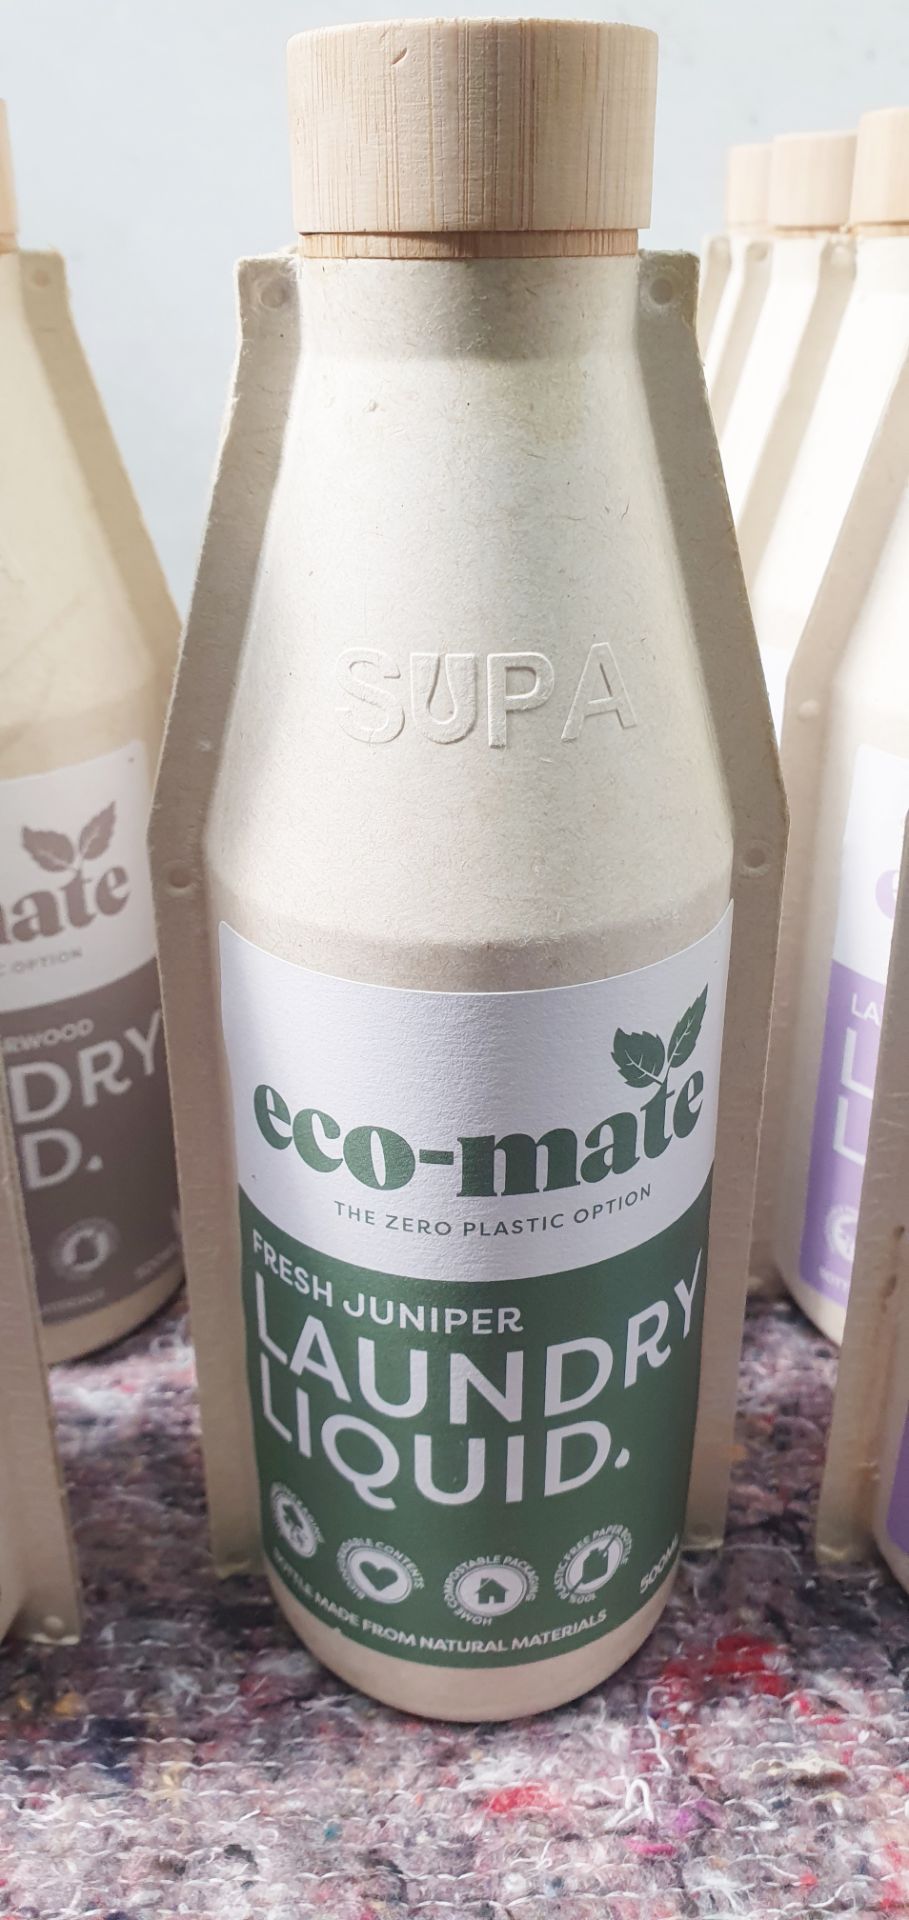 15 x Eco Mate Zero Plastic 500ml Laundry Liquids - Various Scents Included - New Stock - RRP £75 - - Image 6 of 11